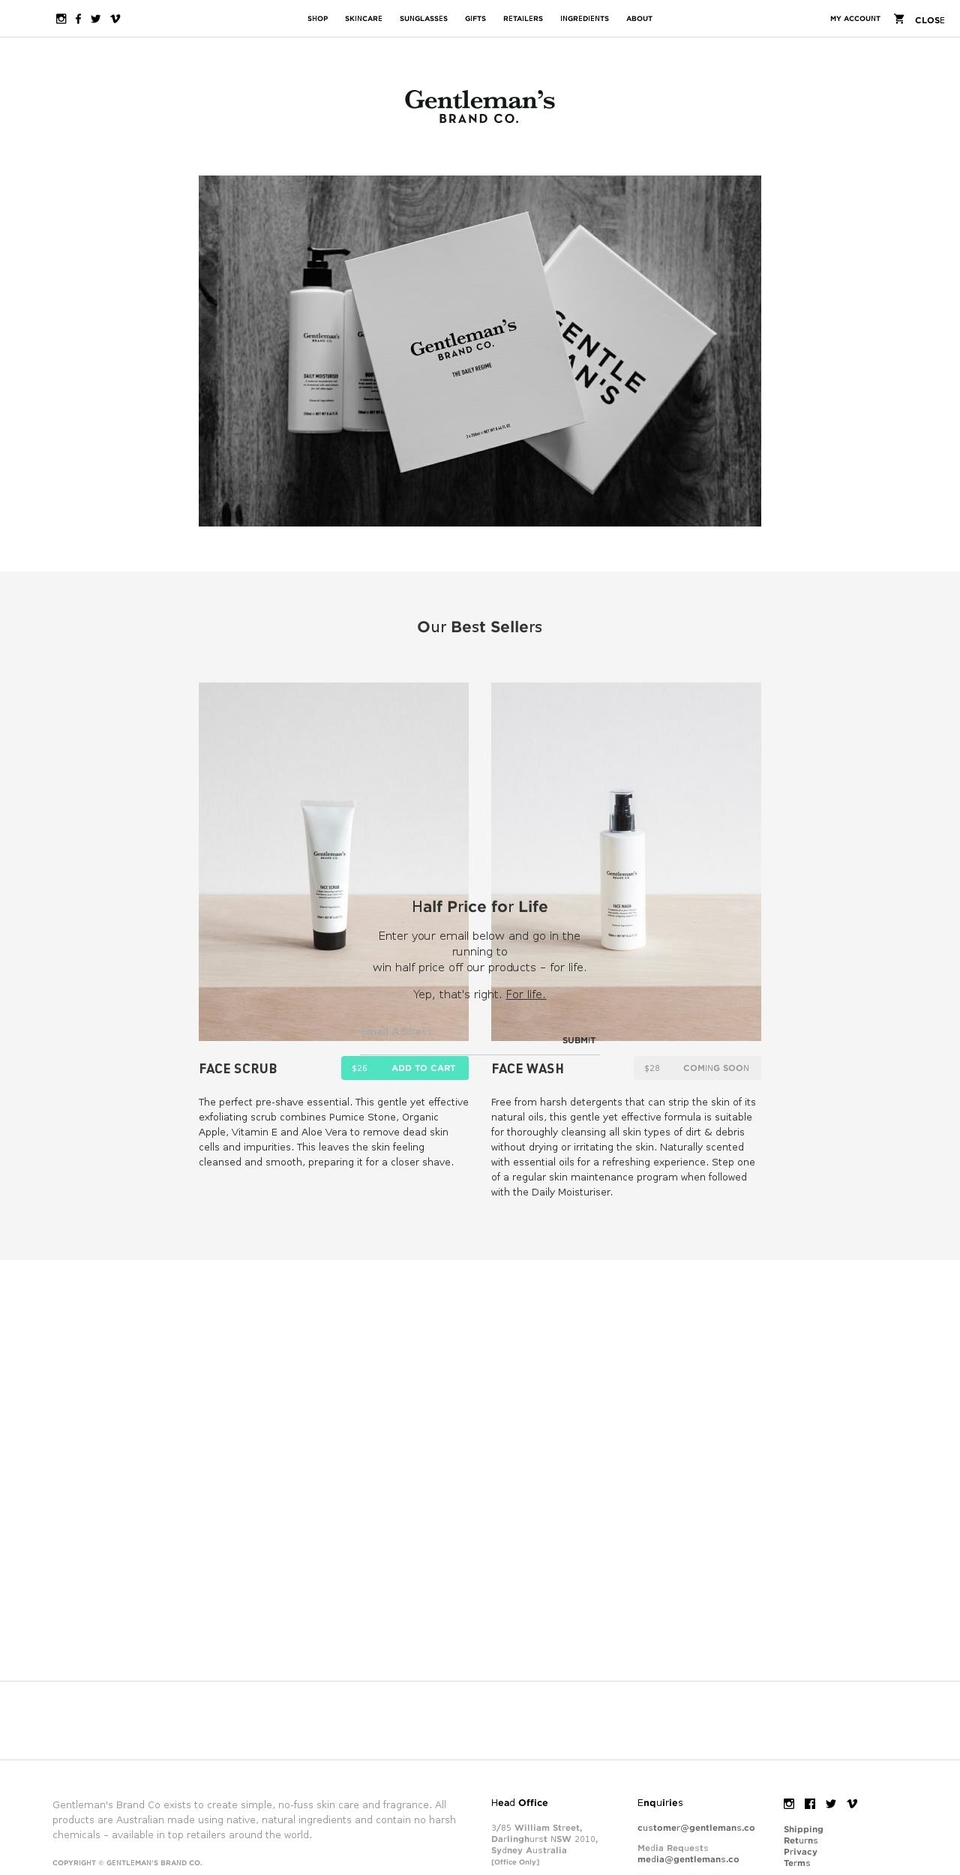 Gentlemans Brand Co 2016 Shopify theme site example gentlemans.co